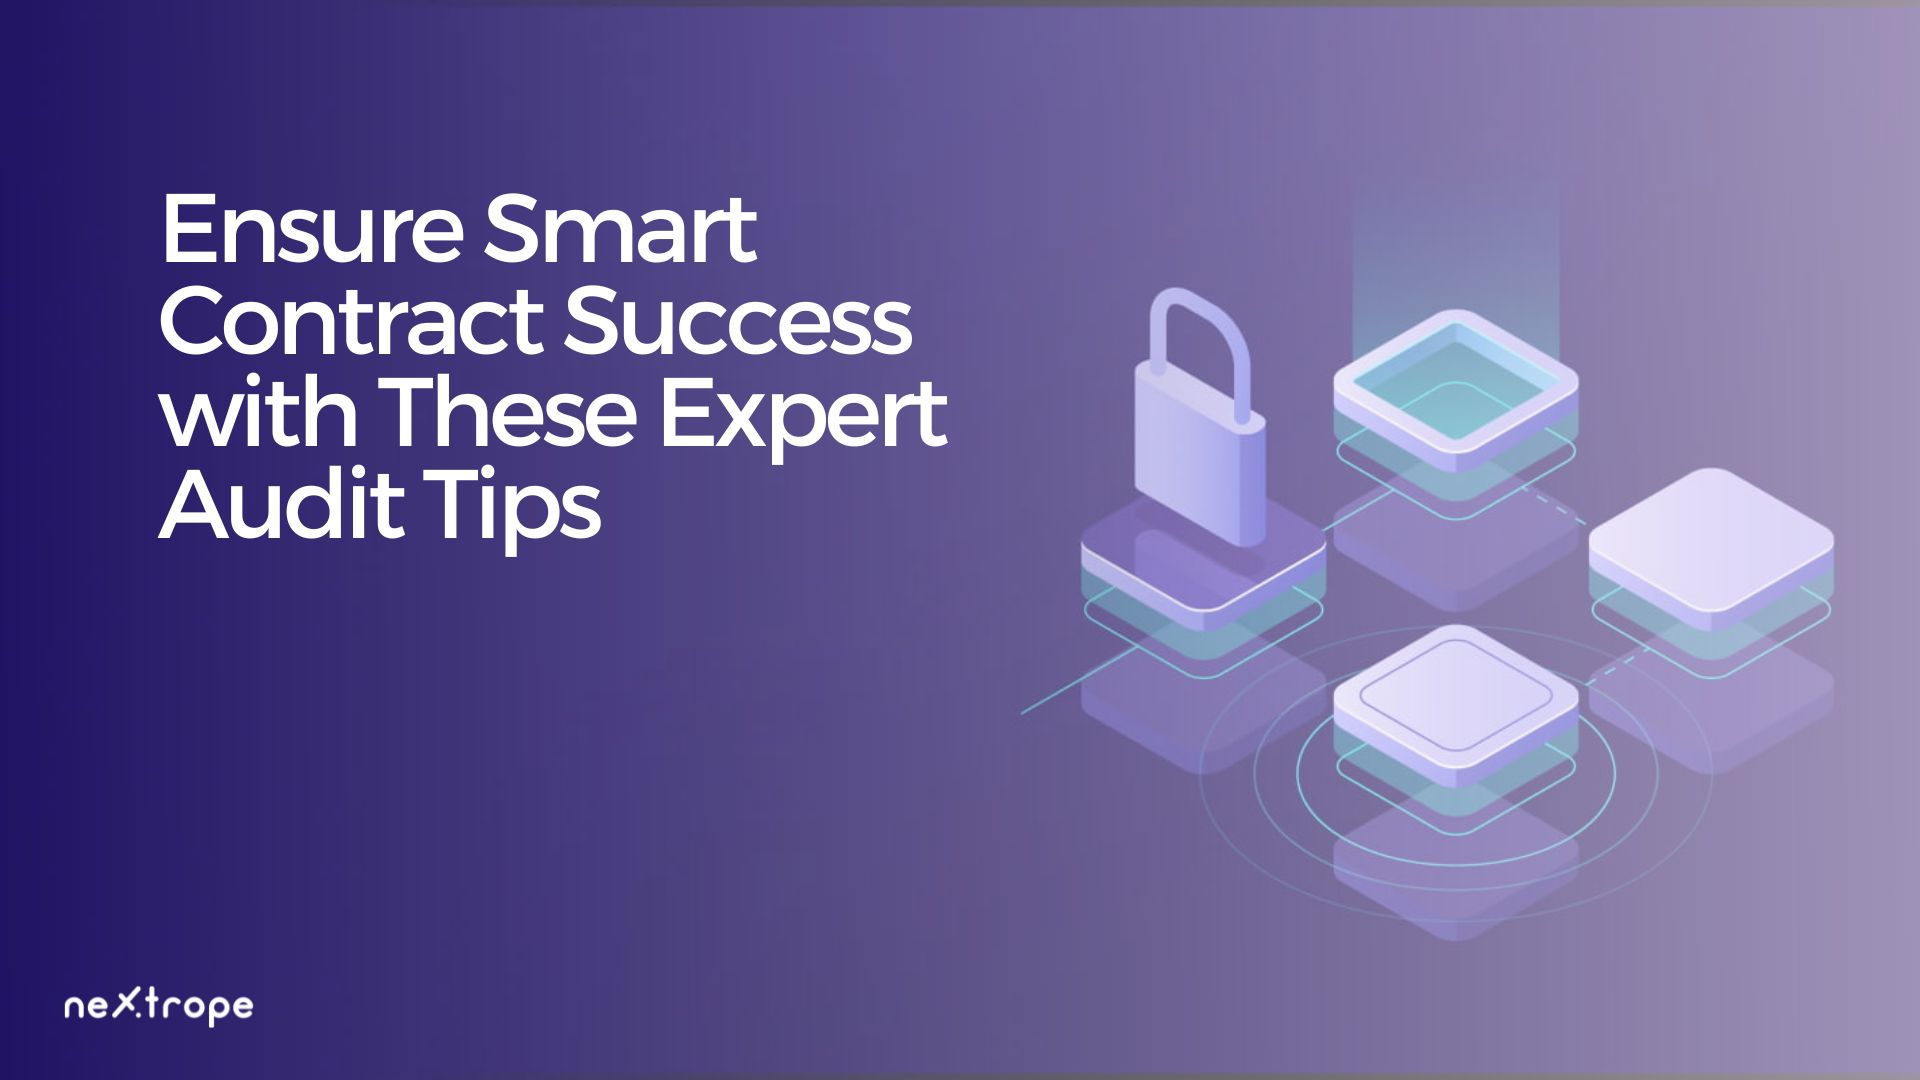 Ensure Smart Contract Success with These Expert Audit Tips